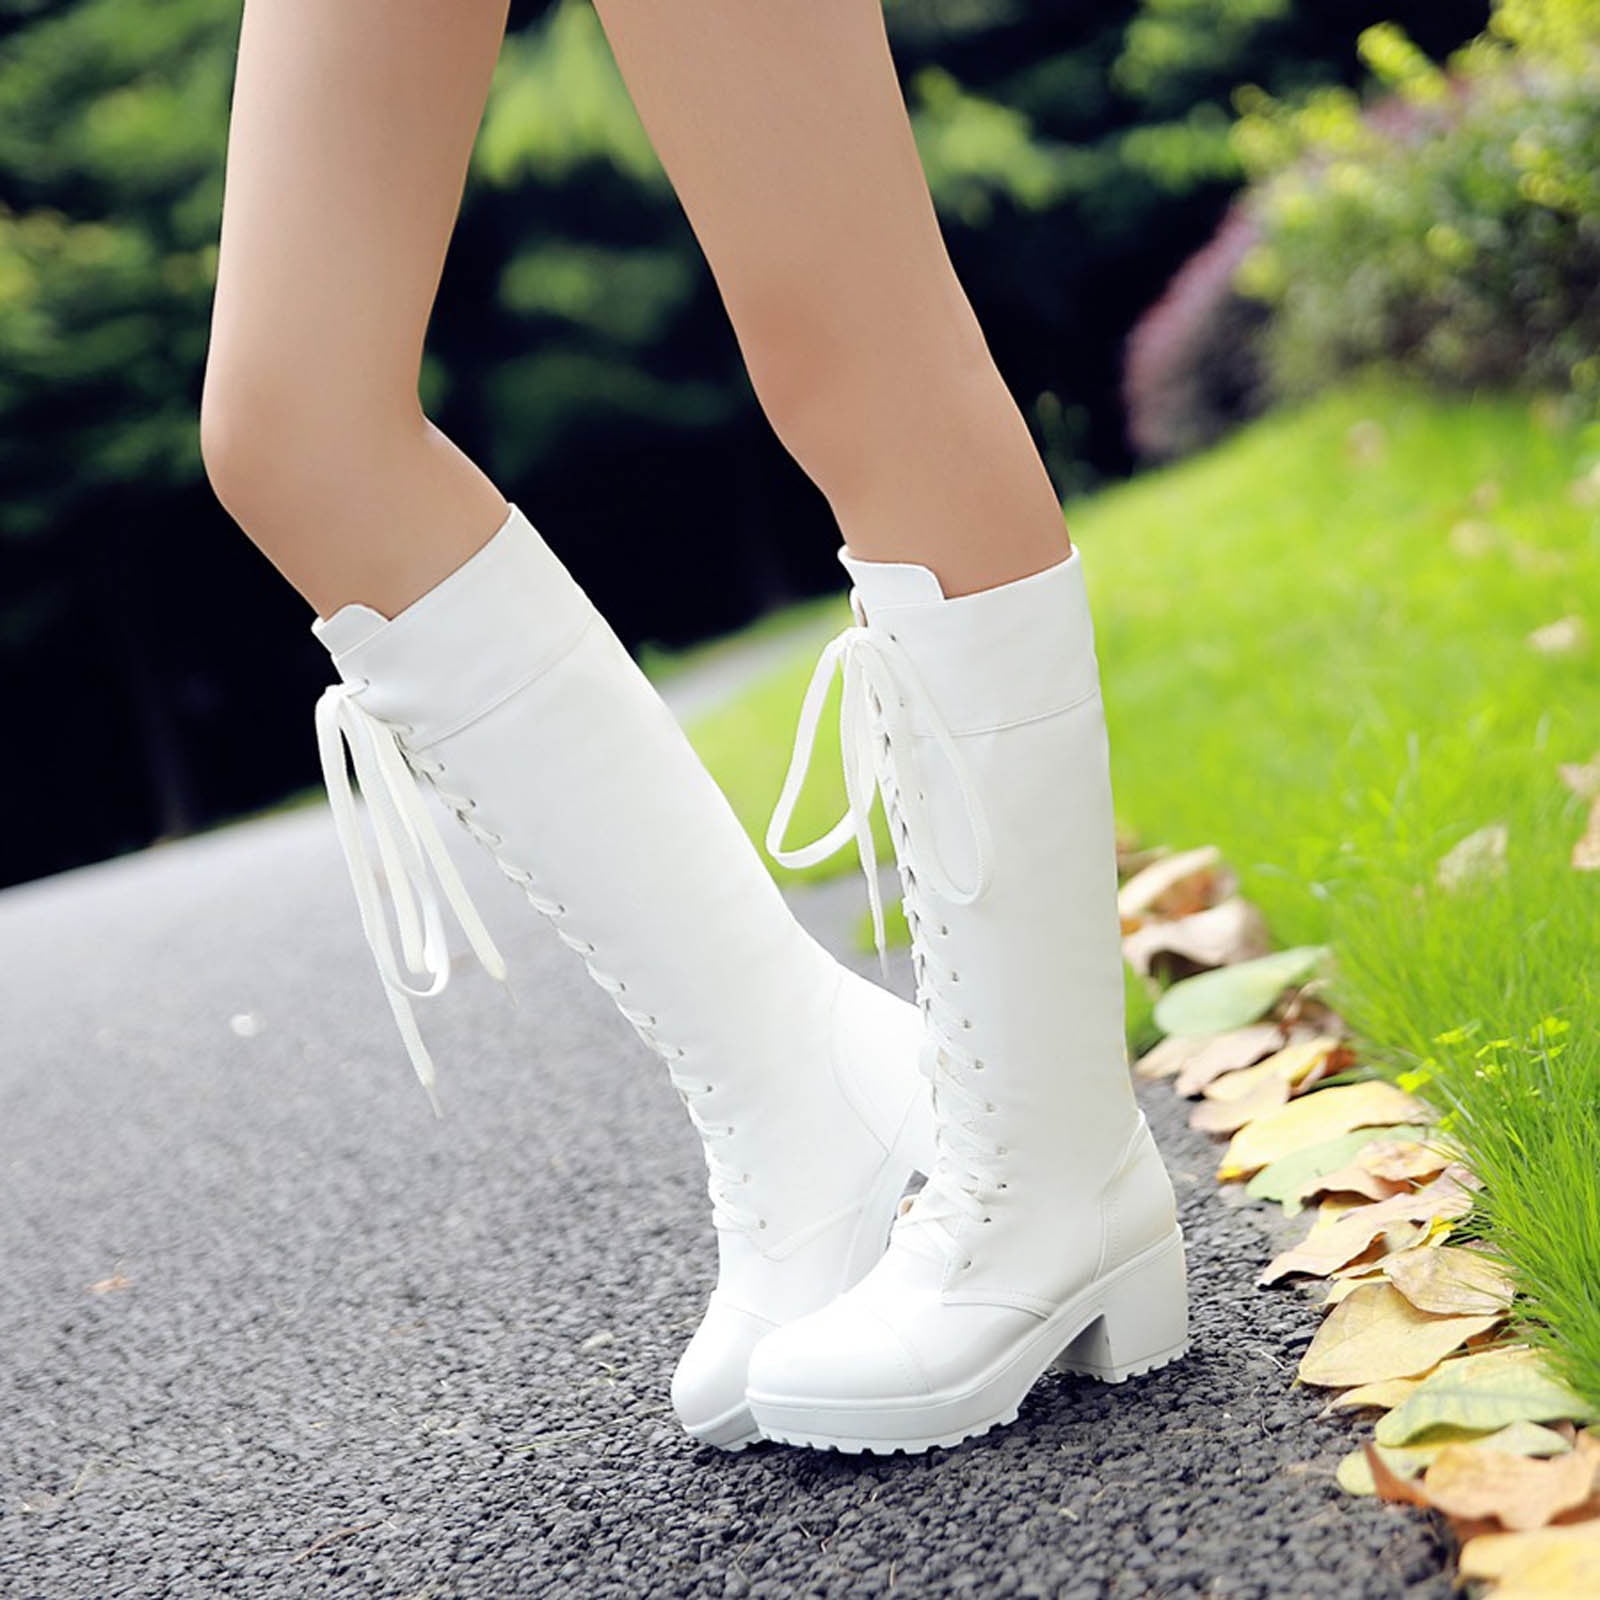 Womens Large Size Stretch Long Leg Boots High Heels Platform Over The Knee  Boots | eBay